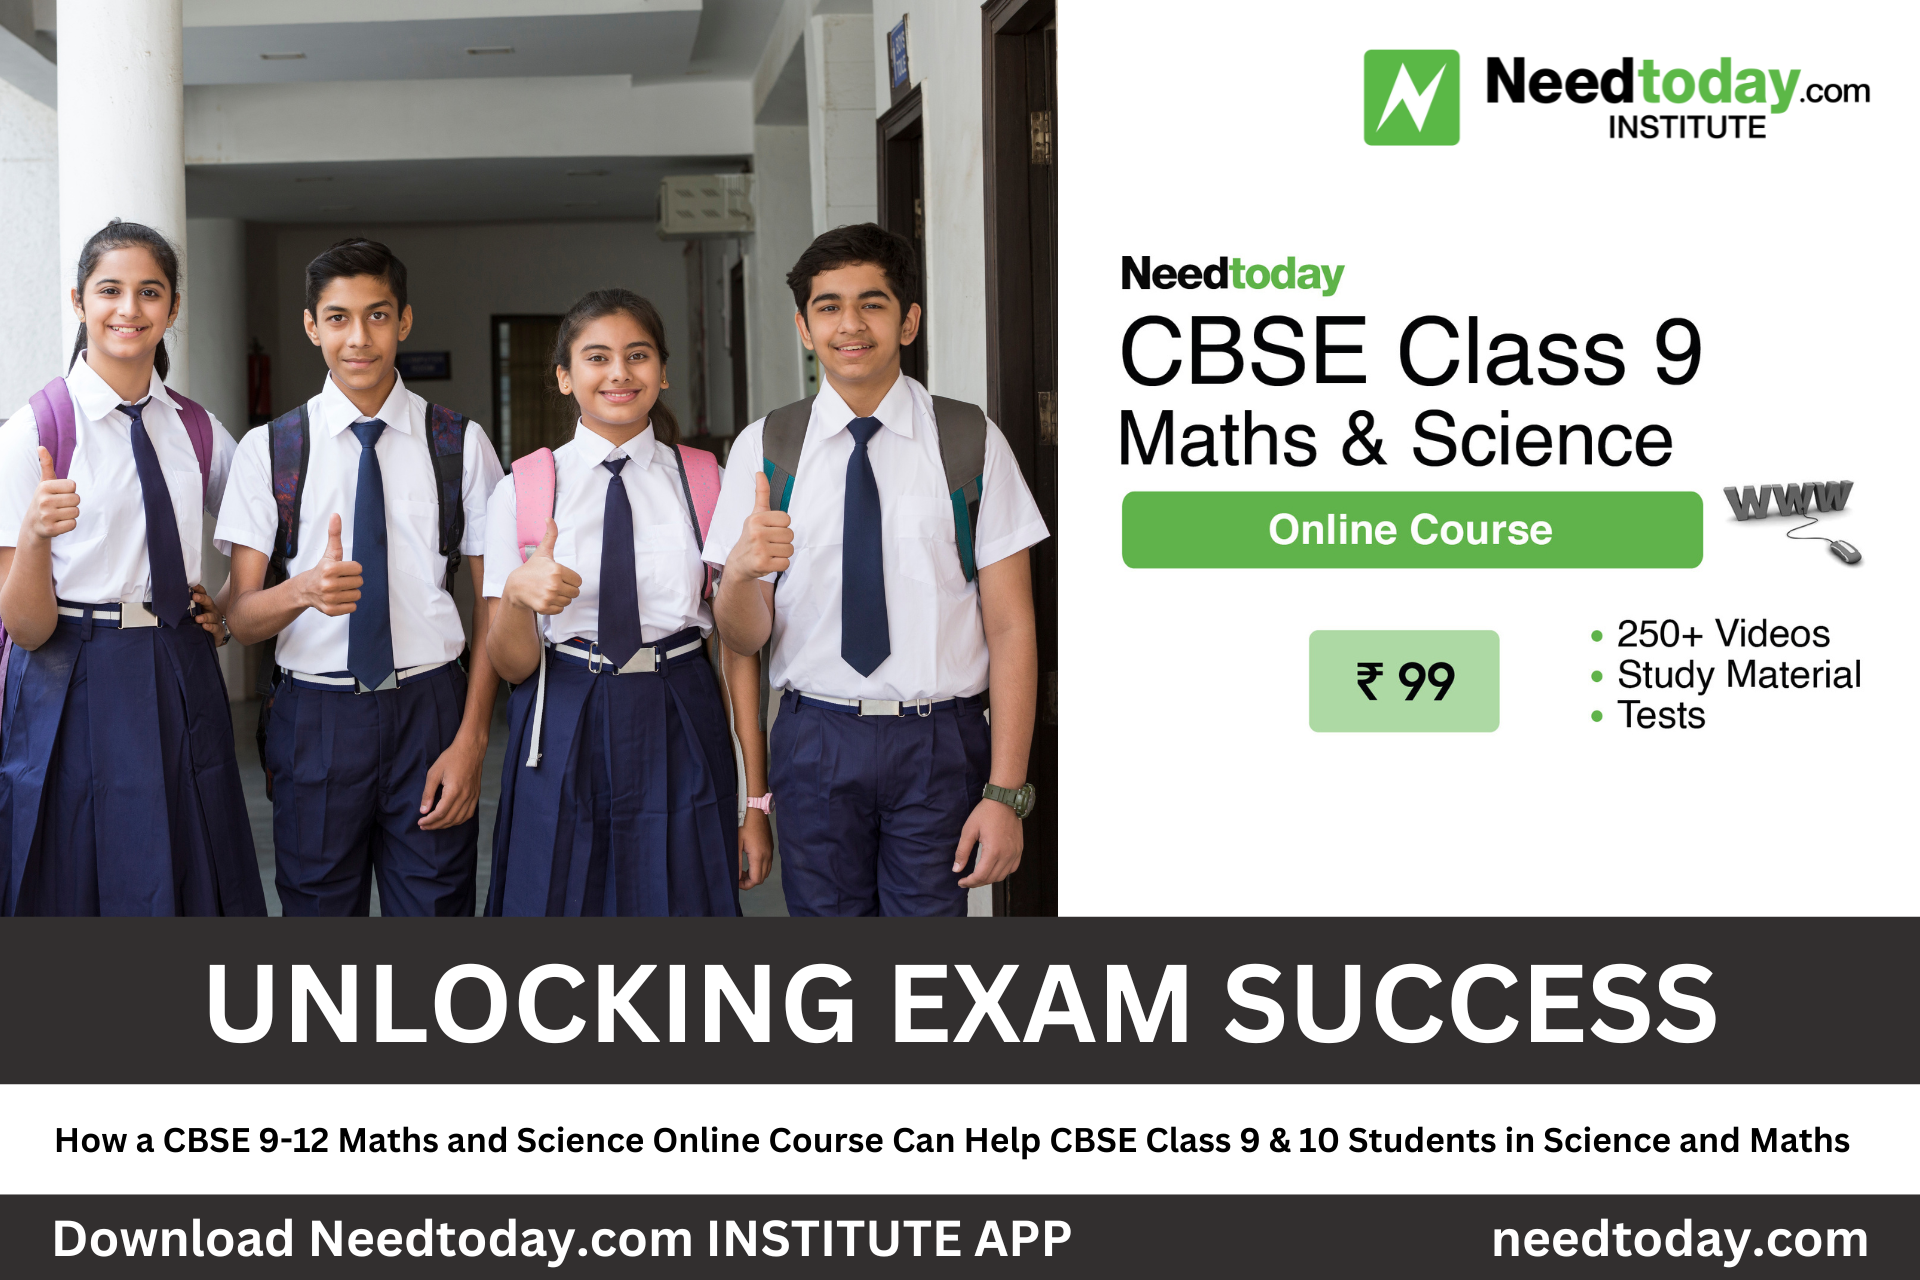 Unlocking Exam Success: How a CBSE 9-12 Maths and Science Online Course Can Help CBSE Class 9 & 10 Students in Science and Maths